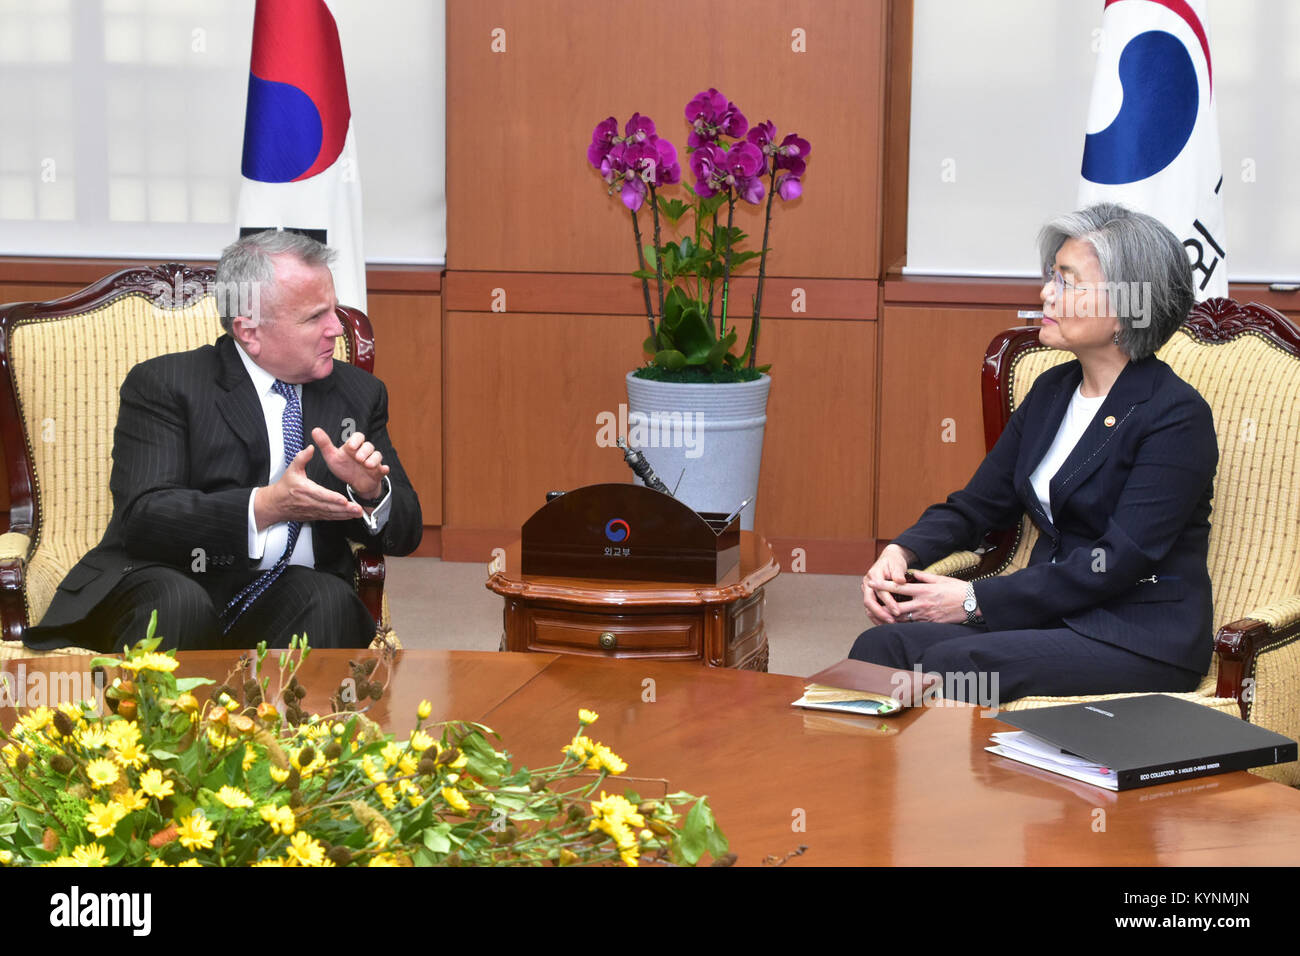 Deputy Secretary of State John Sullivan meets with Republic of Korea Foreign Minister Kang Kyung-wha in Seoul, South Korea on October 18, 2017. Stock Photo